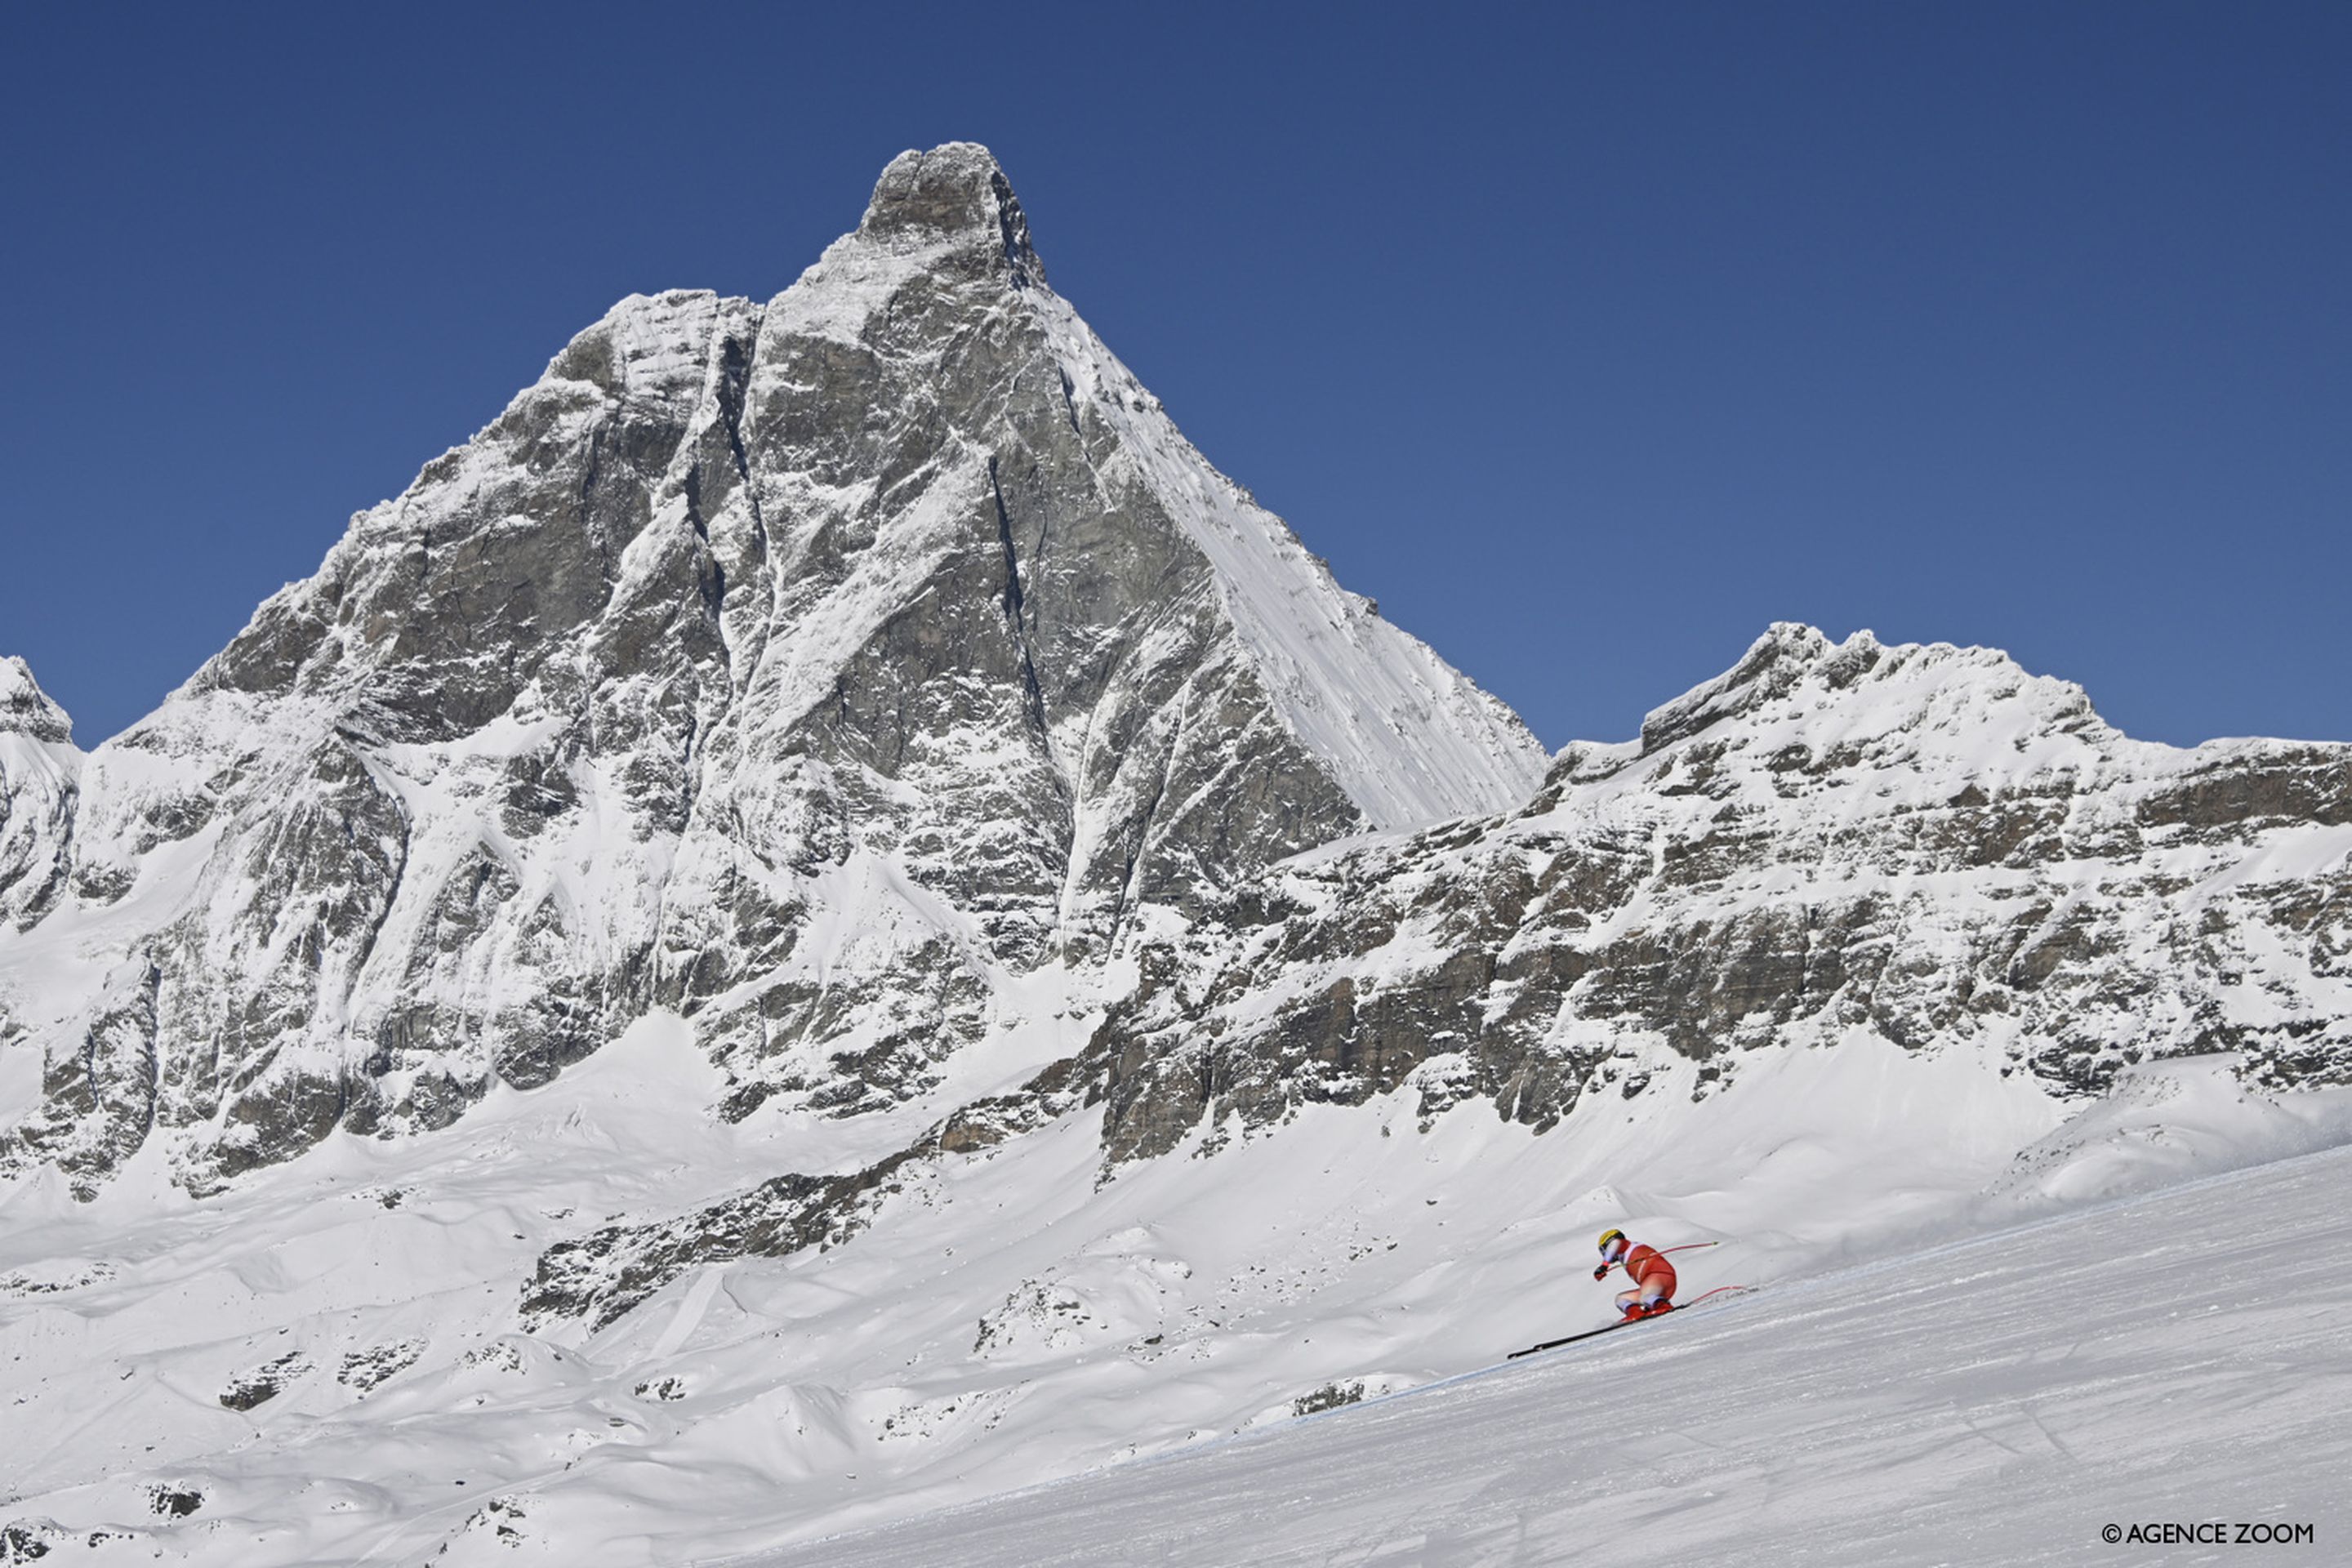 One training run was possible down the course spiralling round the Matterhorn @AgenceZoom